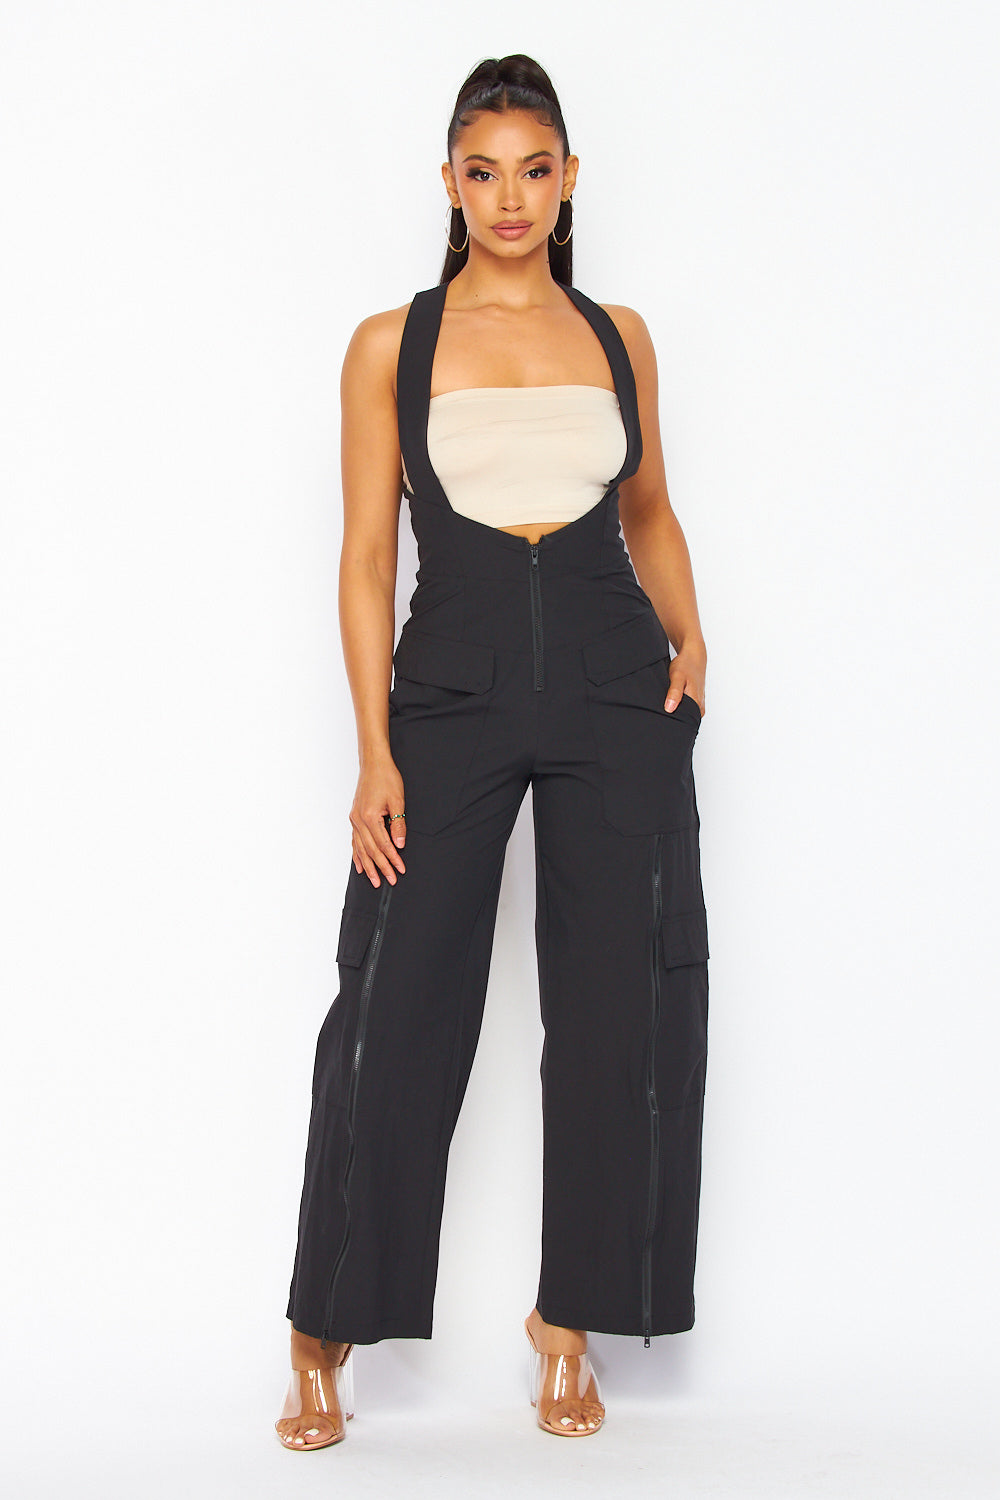 Choose Me Nylon Cargo Pocket Pant Overall Jumpsuit